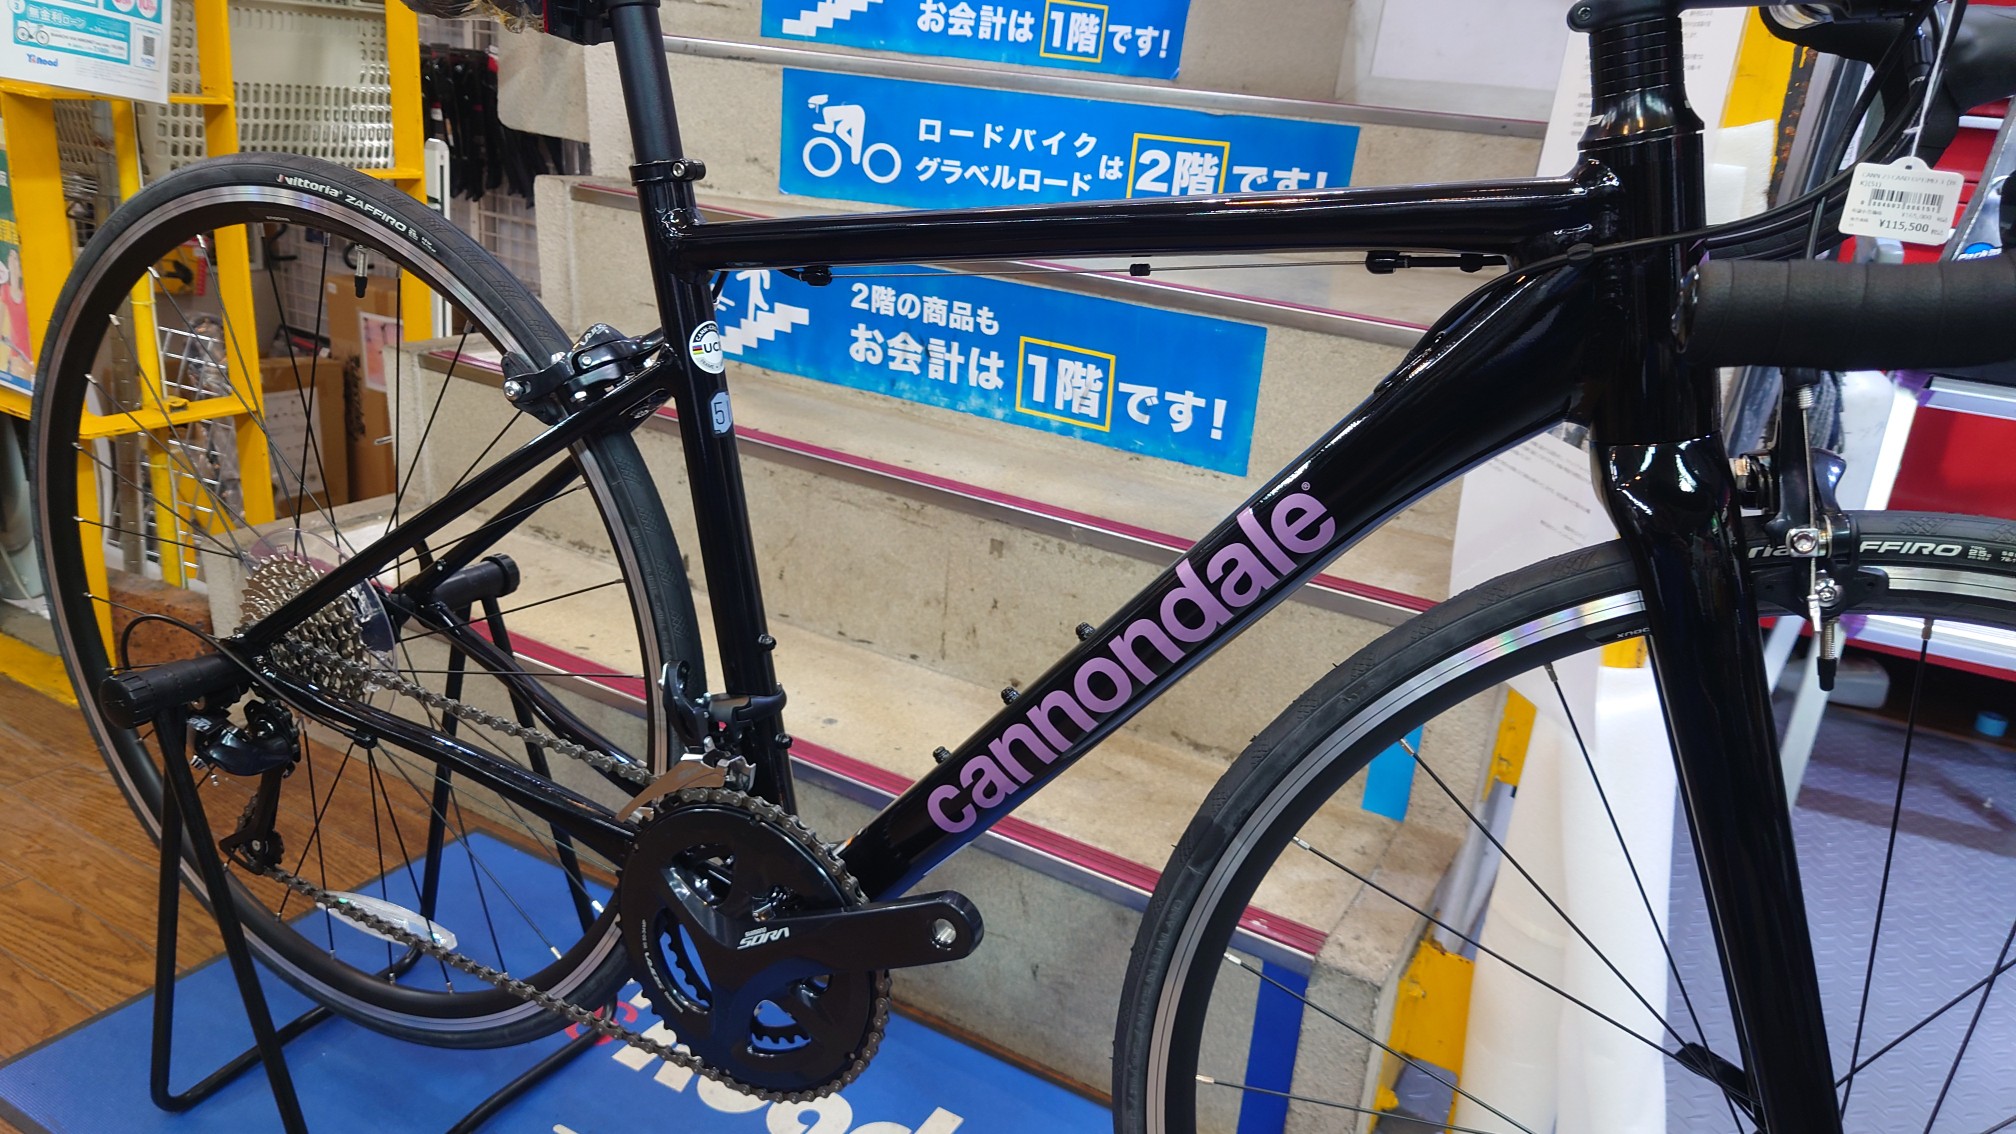 CANNONDALE | 志木、新座、富士見、川越、所沢、さいたまでスポーツ 